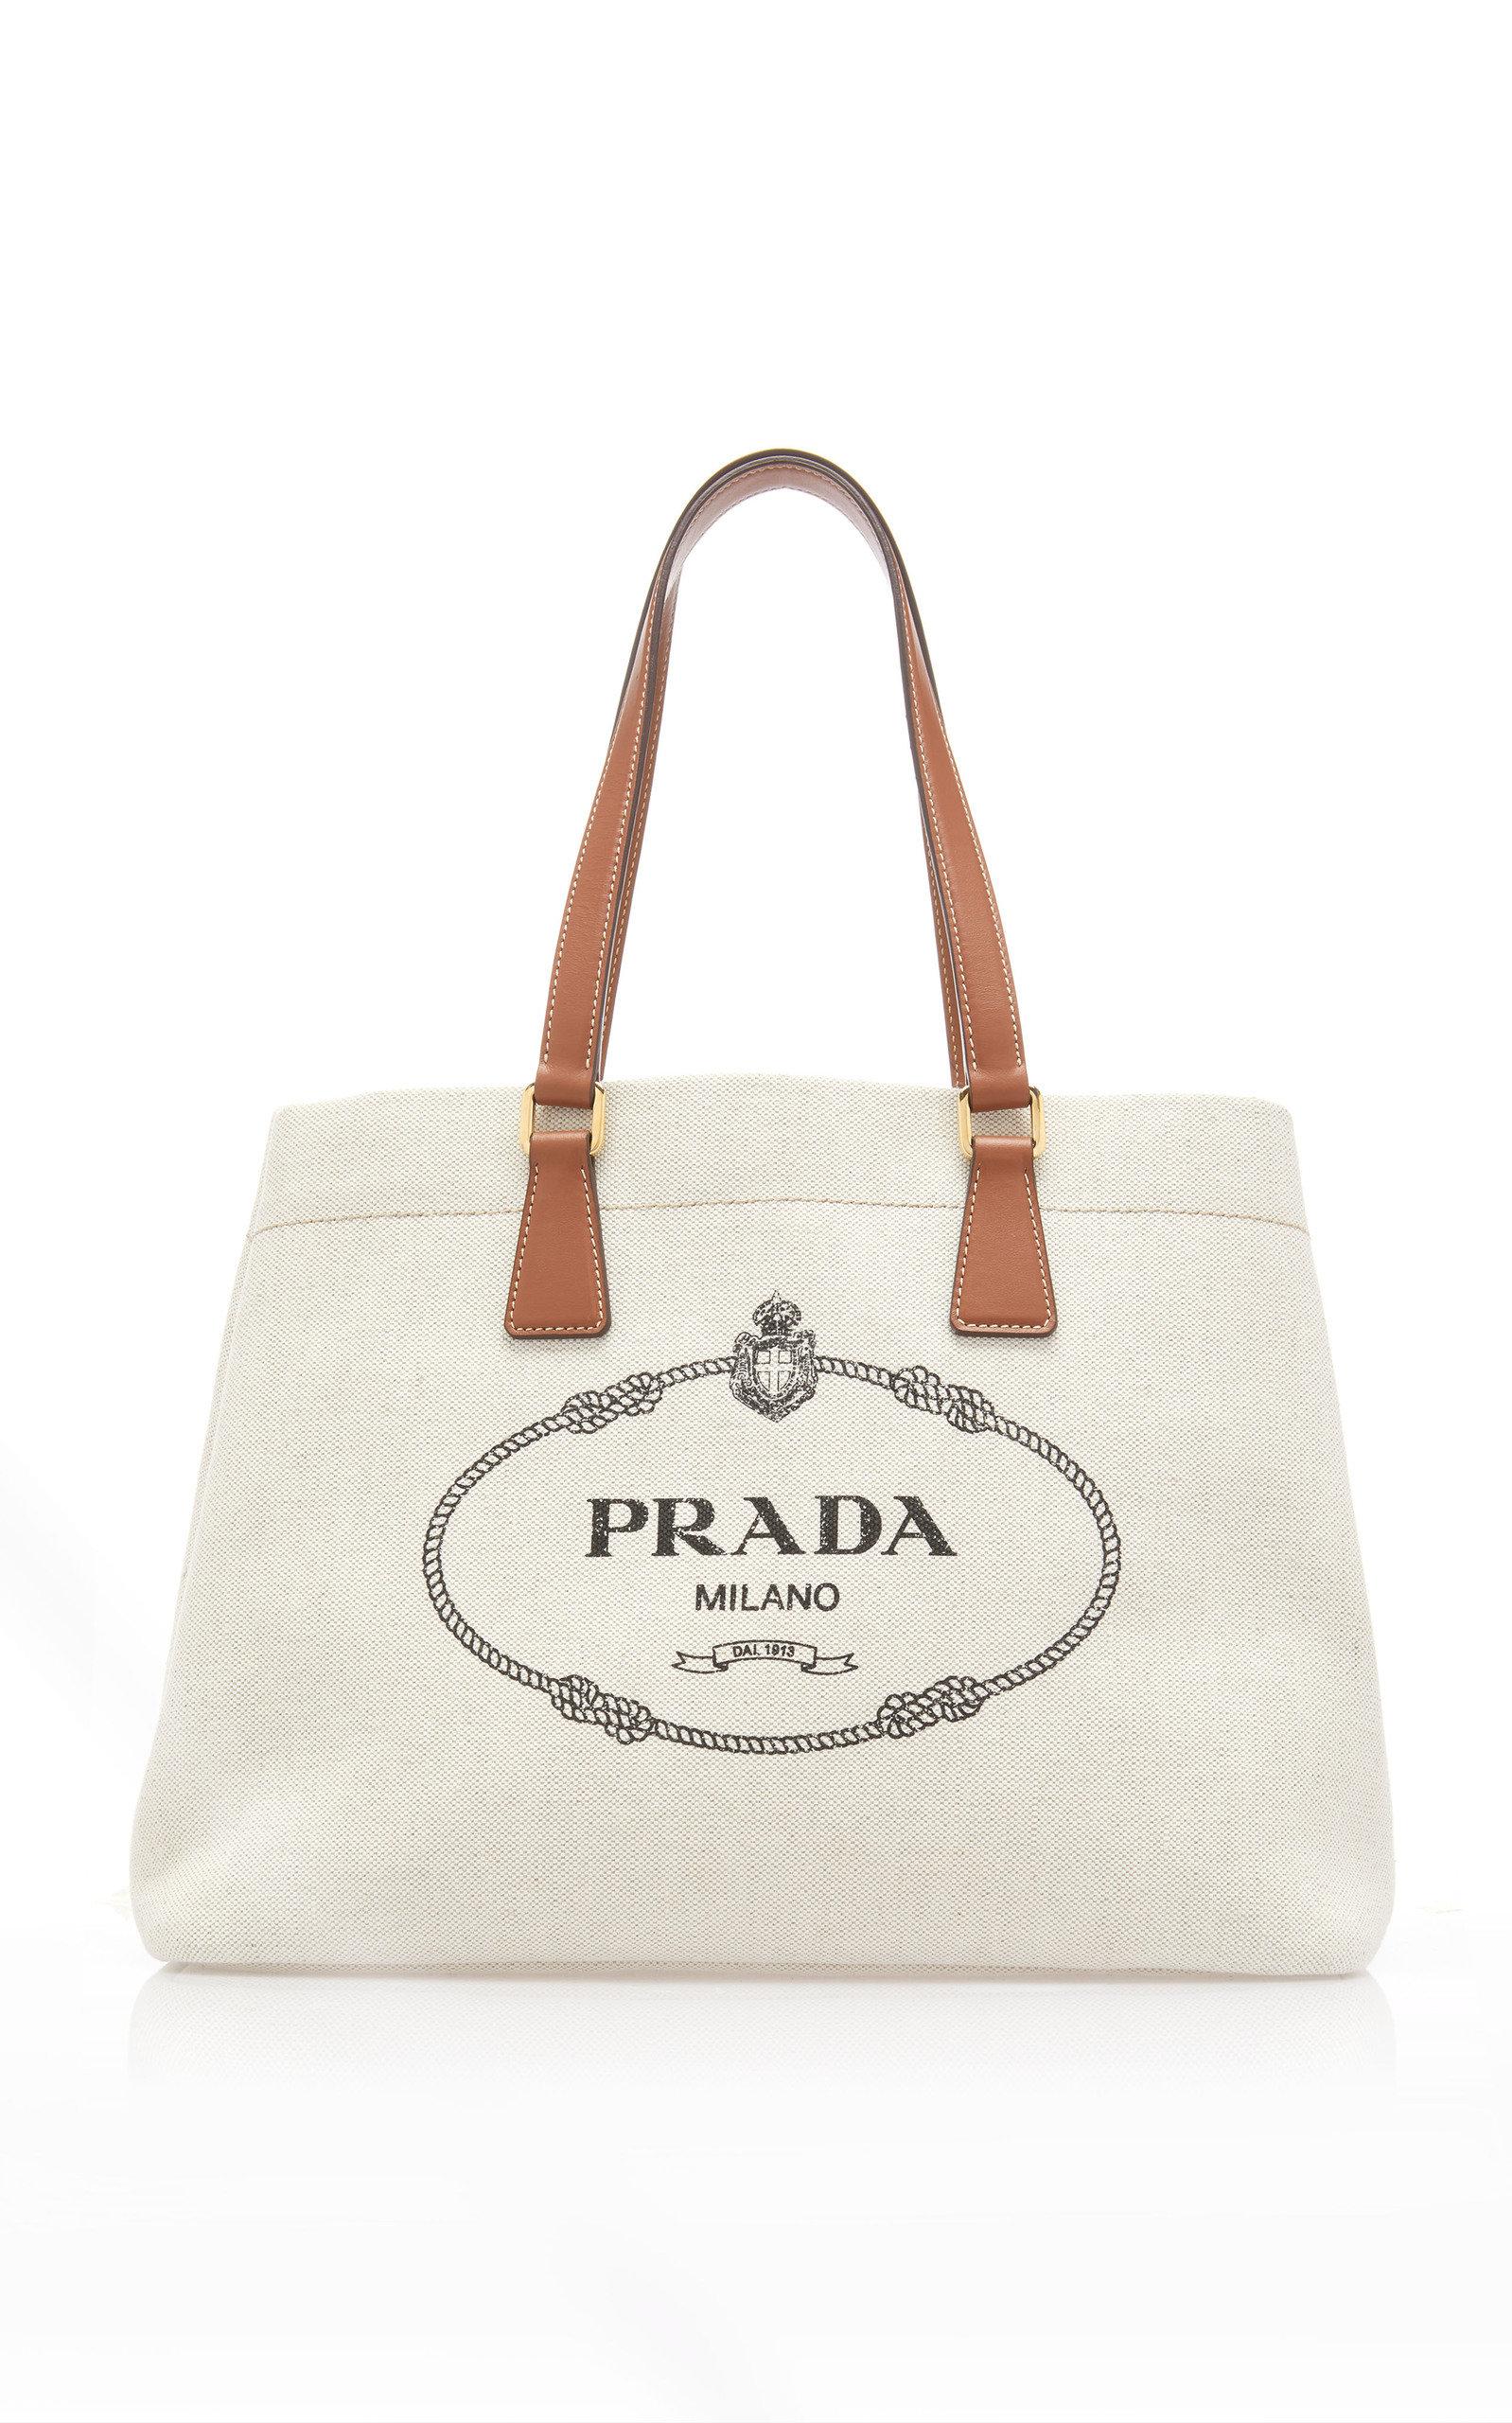 Prada Logo-embroidered Canvas Tote Bag in White - Lyst